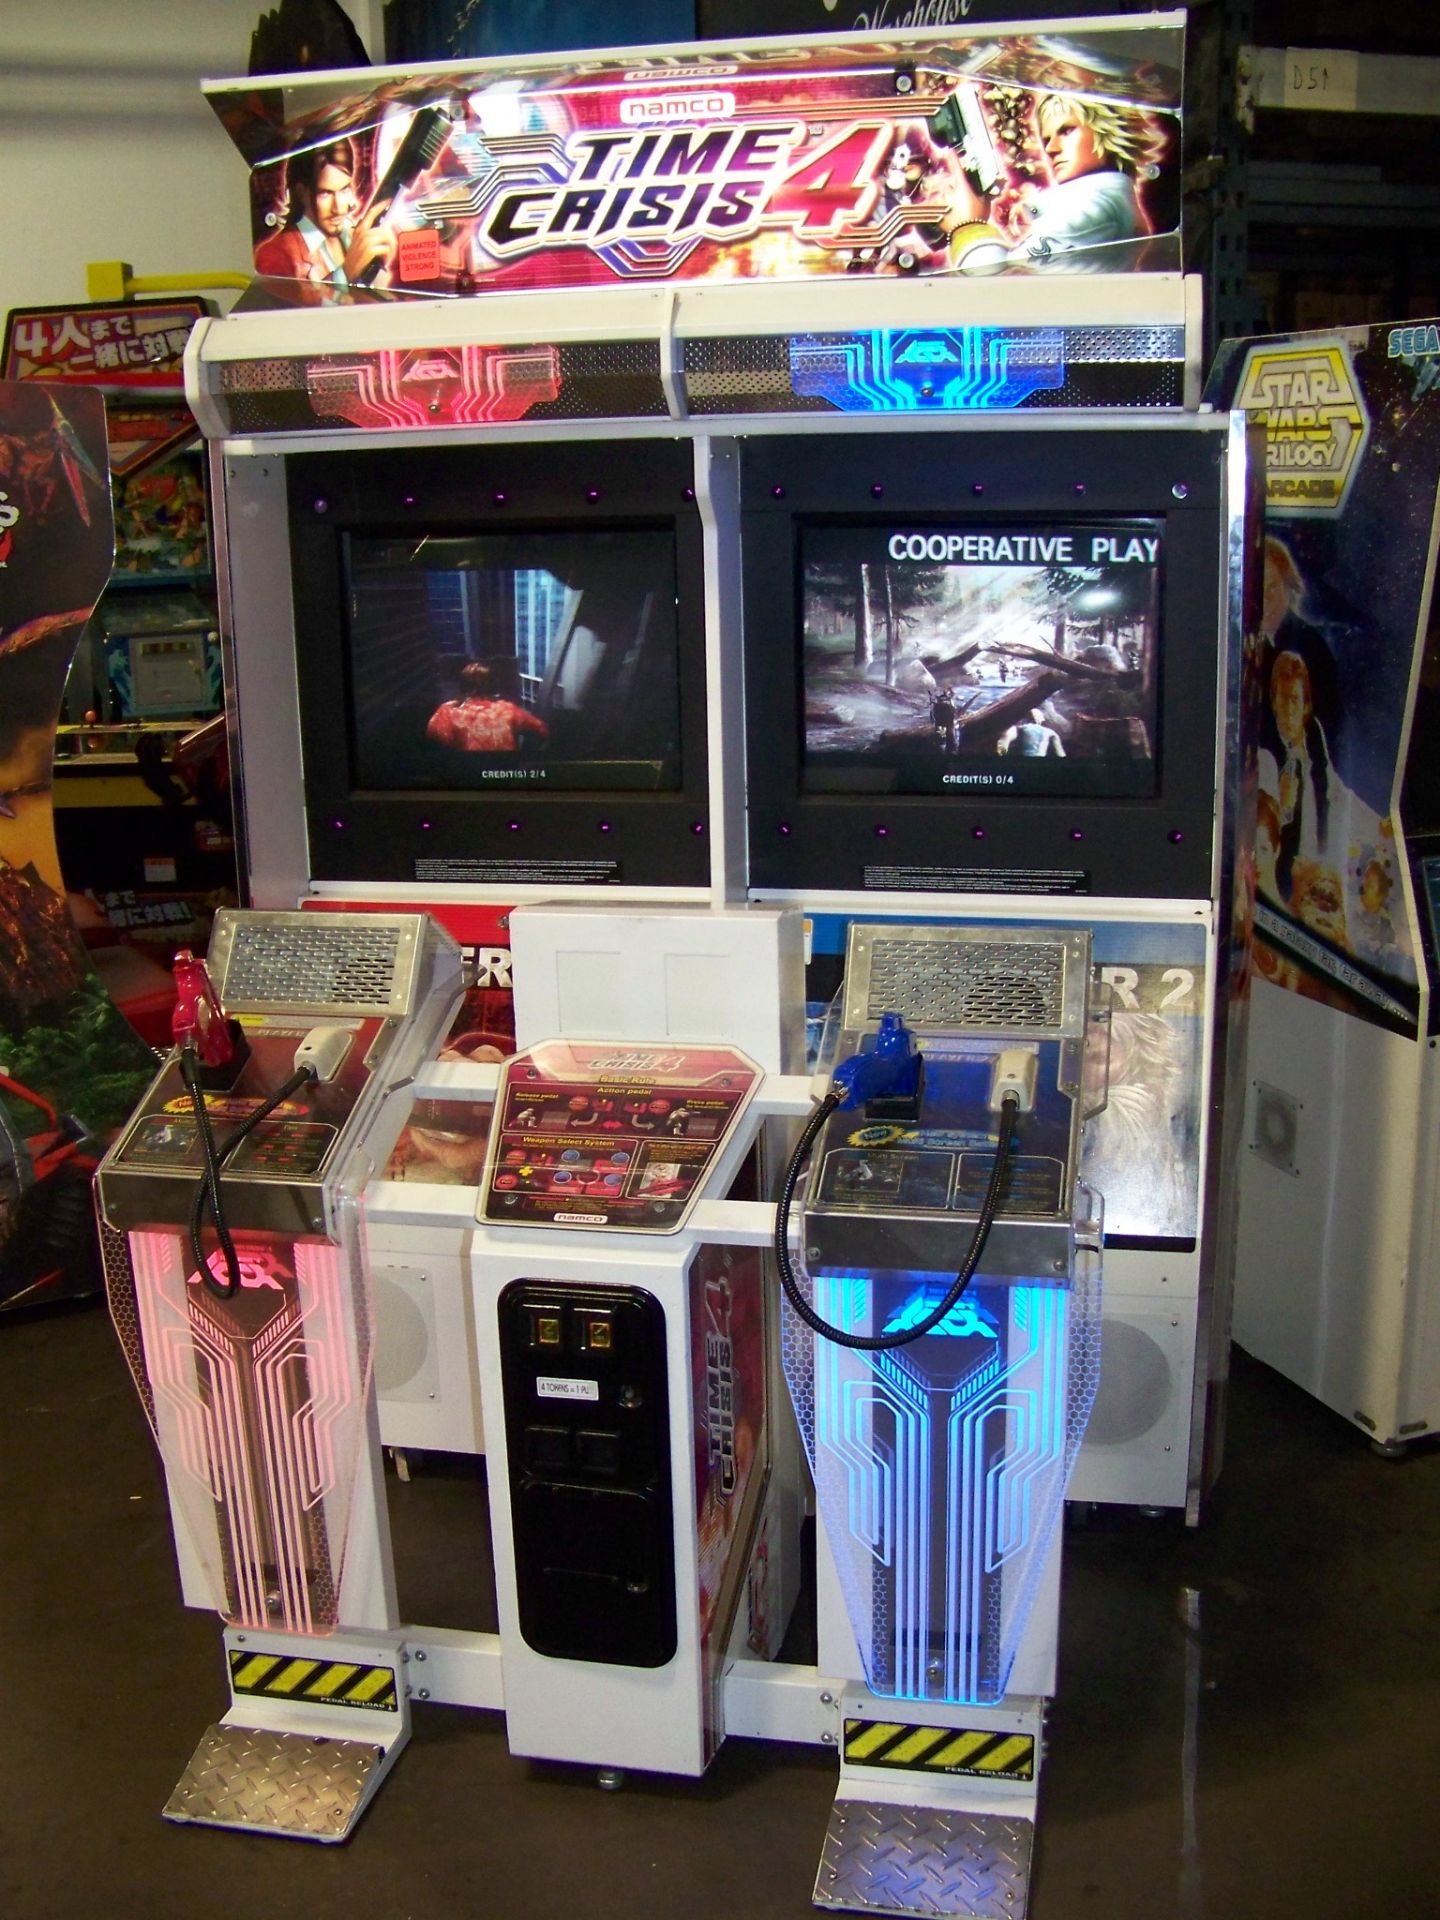 TIME CRISIS 4 TWIN SHOOTER ARCADE GAME NAMCO Item is in used condition. Evidence of wear and